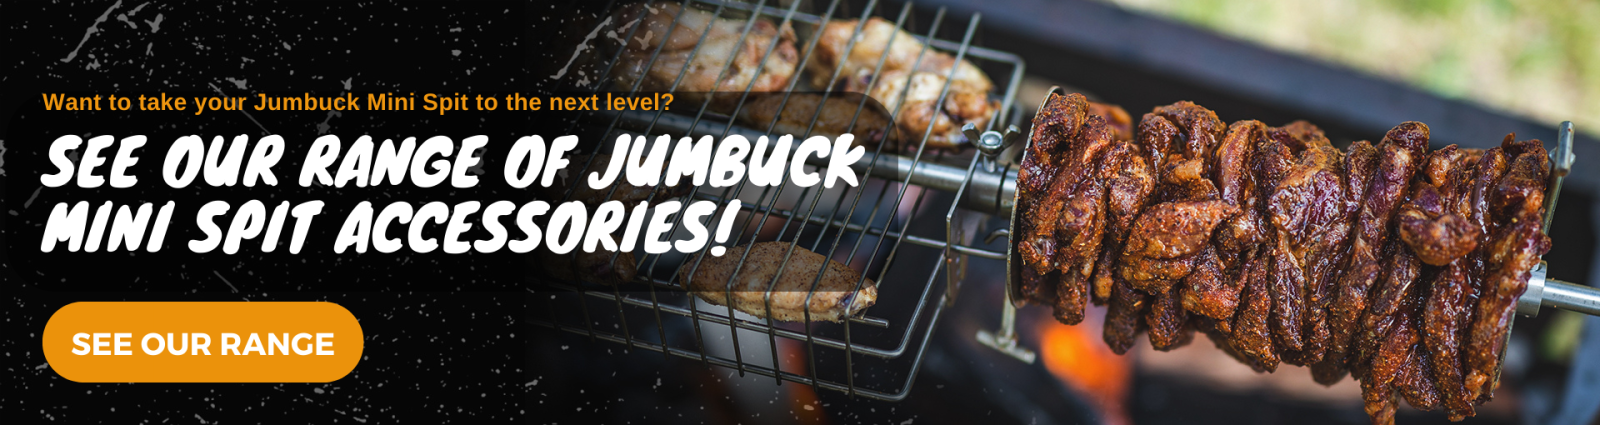 This image will take you to a page where you can buy a range of Jumbuck Mini Spit Accessories!